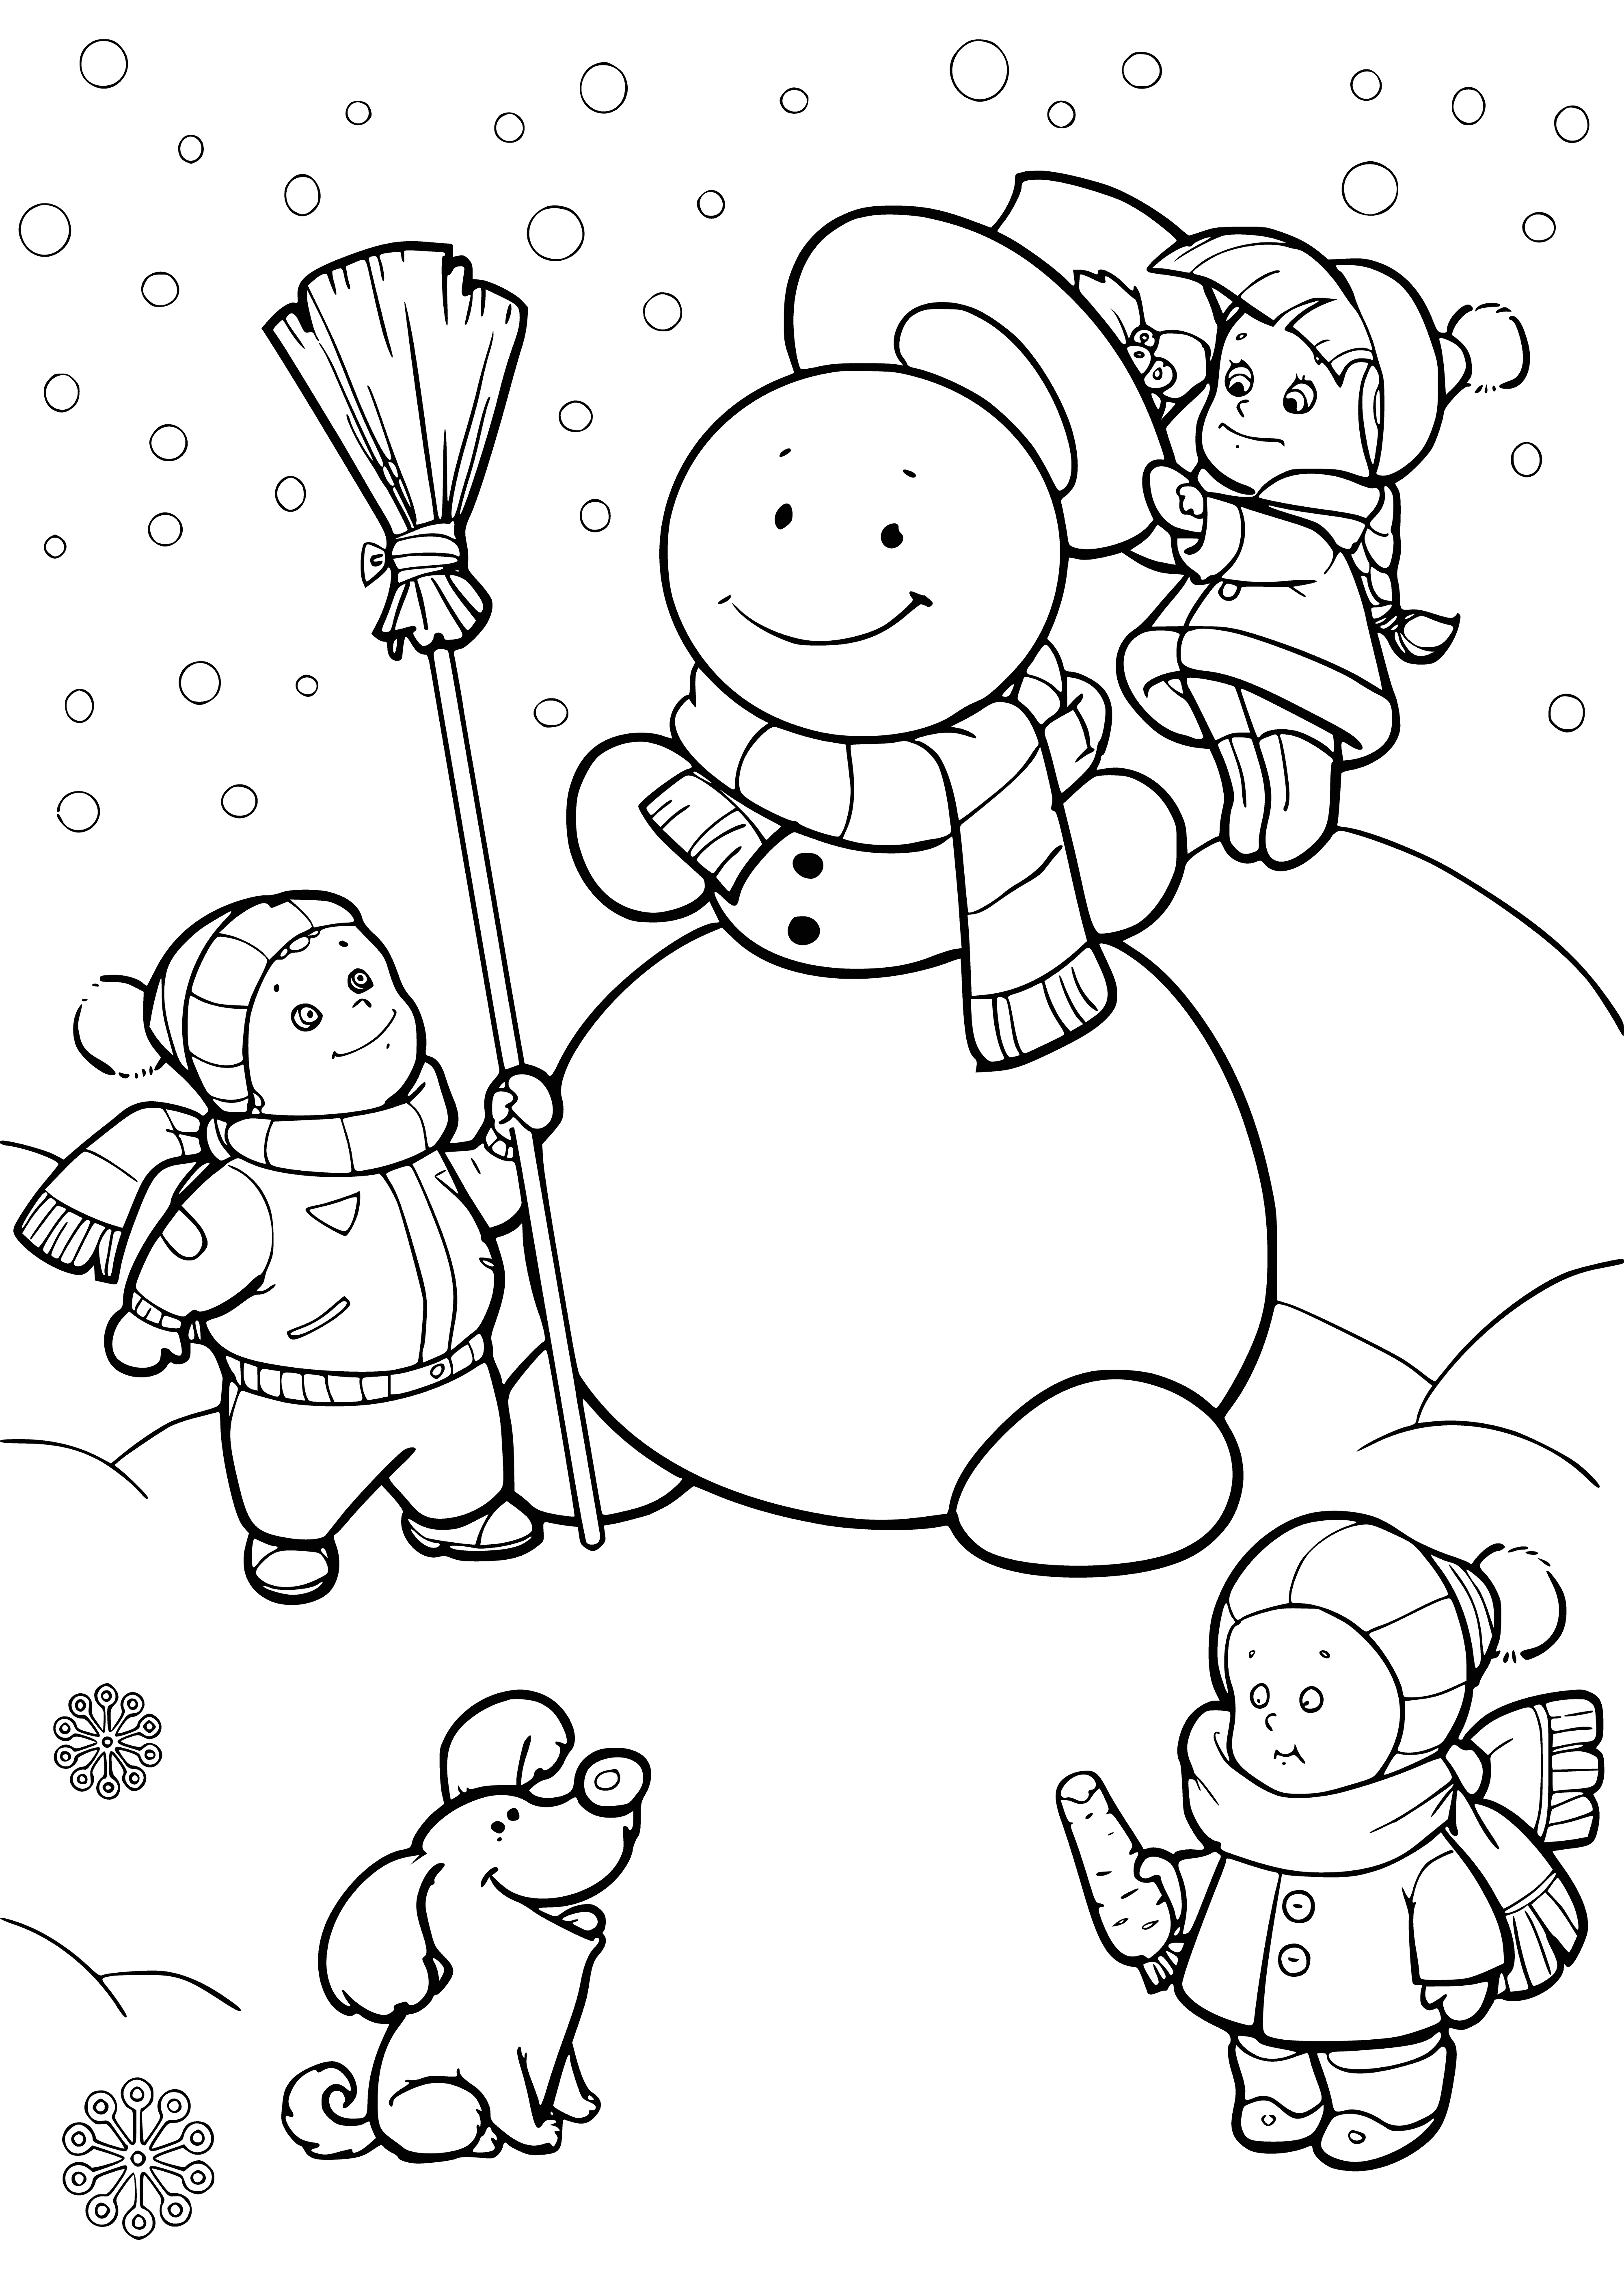 coloring page: Kids build snowman, packing snow to form body/arms/head, excited & having fun in snowy playground.